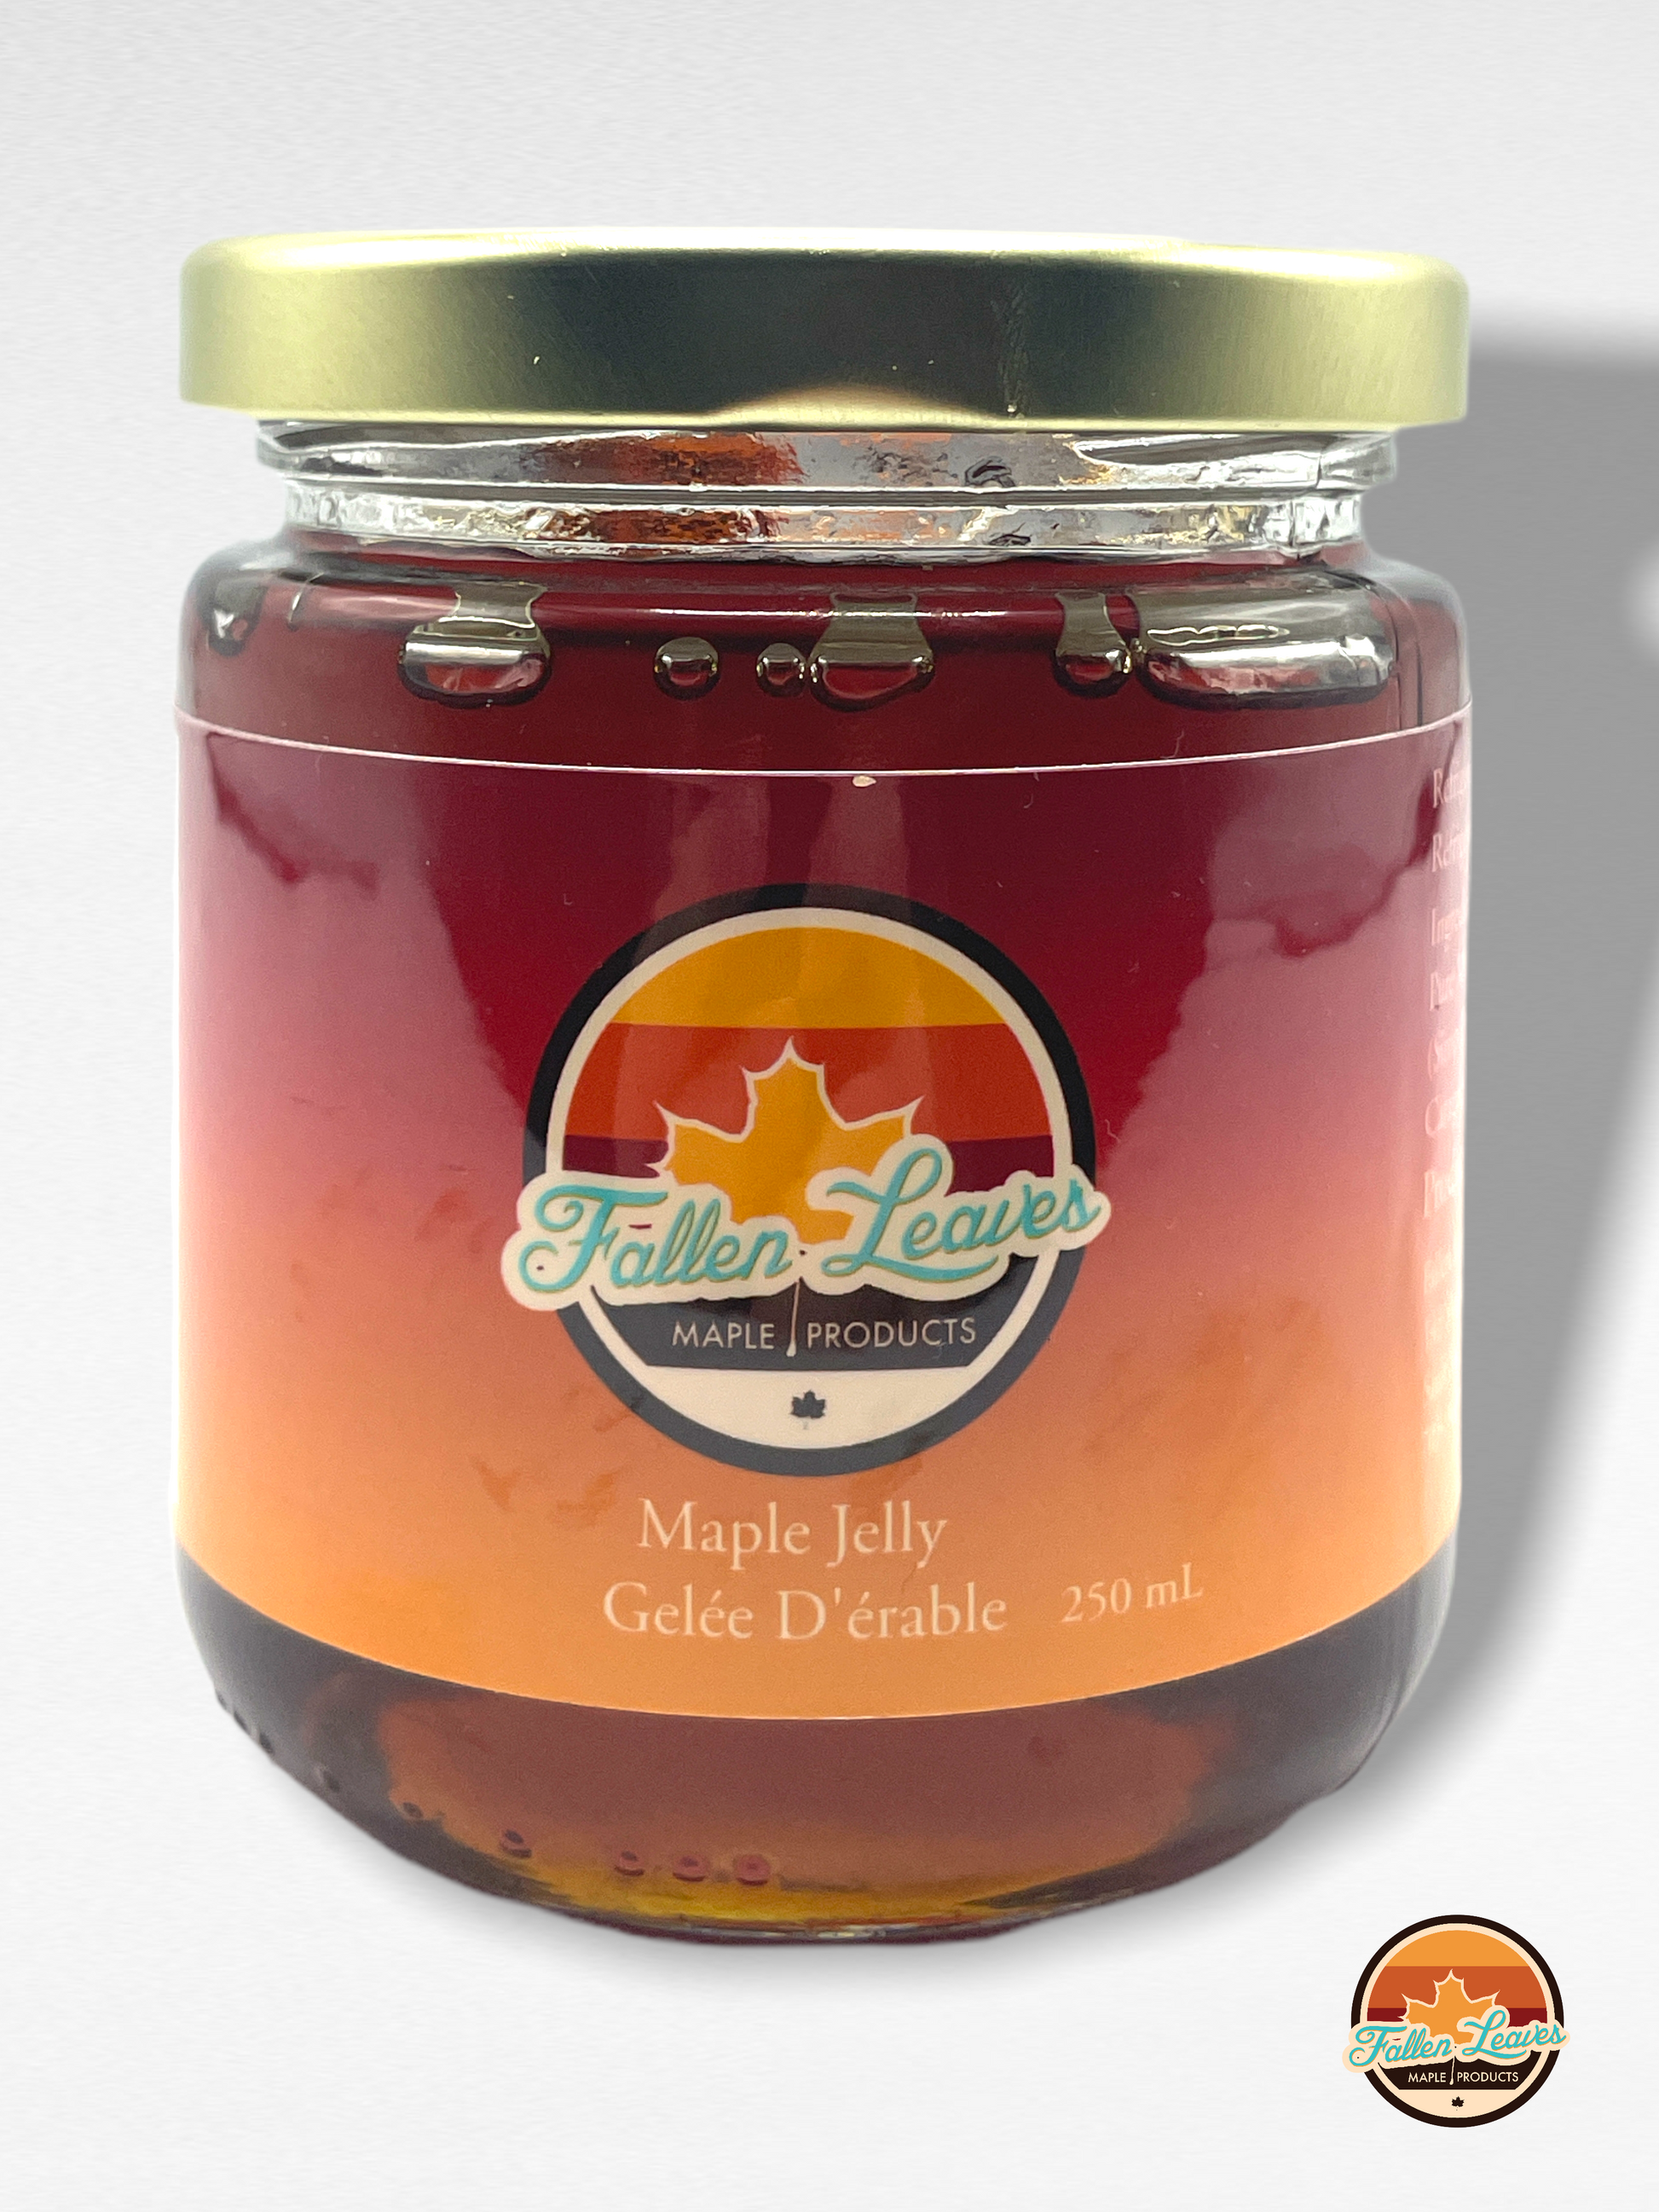 Maple Jelly Fallen Leaves Maple Products